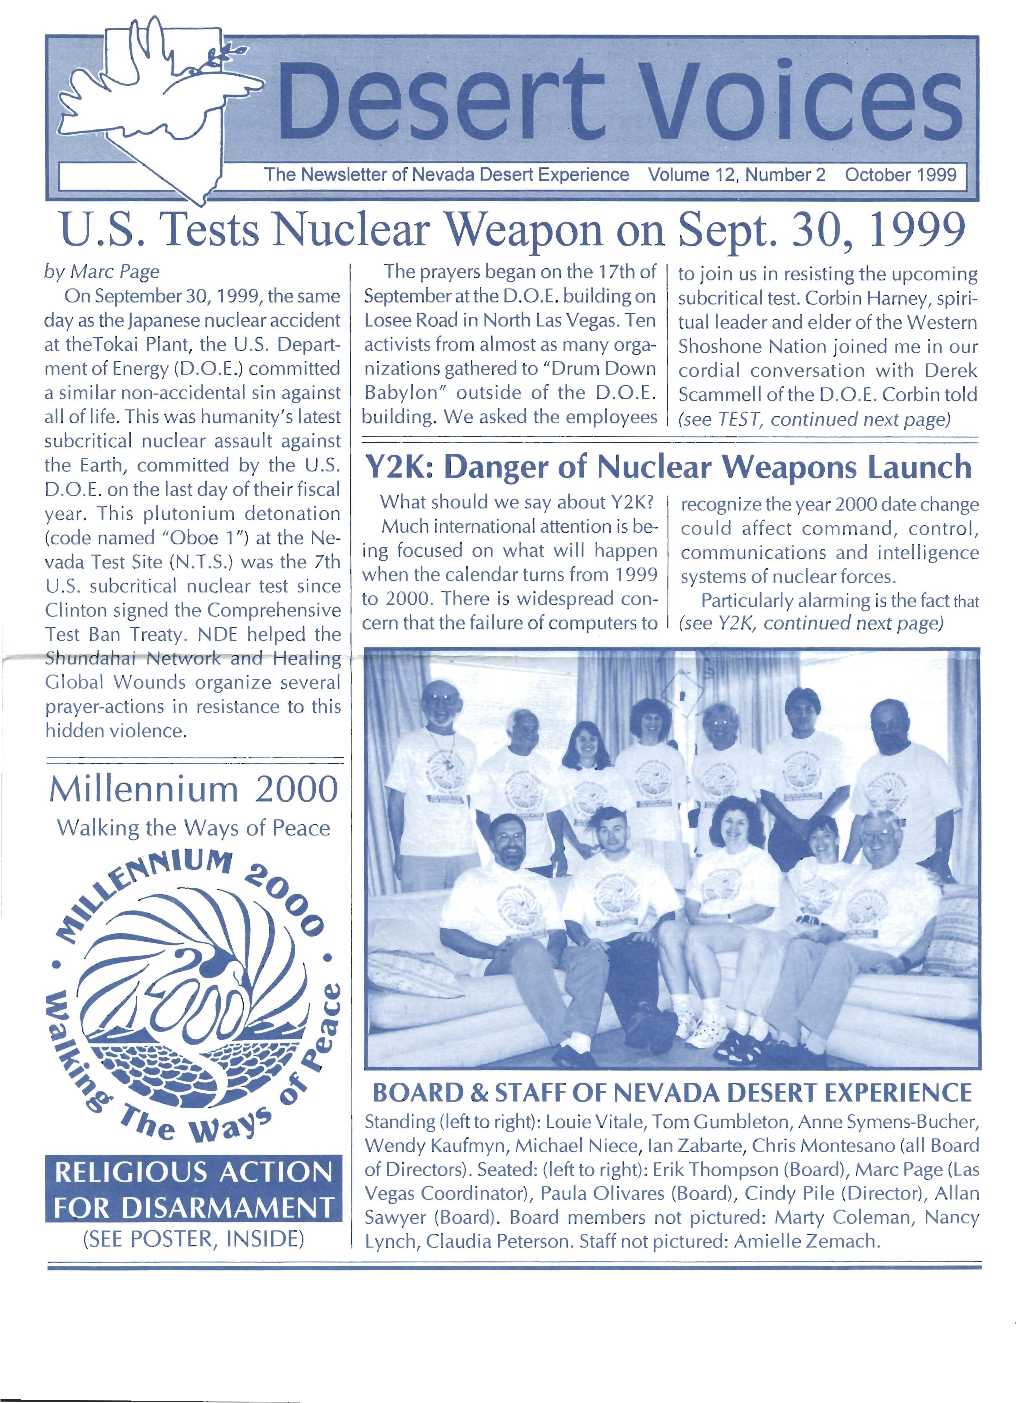 U.S. ~Ests Nuclear Weapon on Sept. 30, 1999